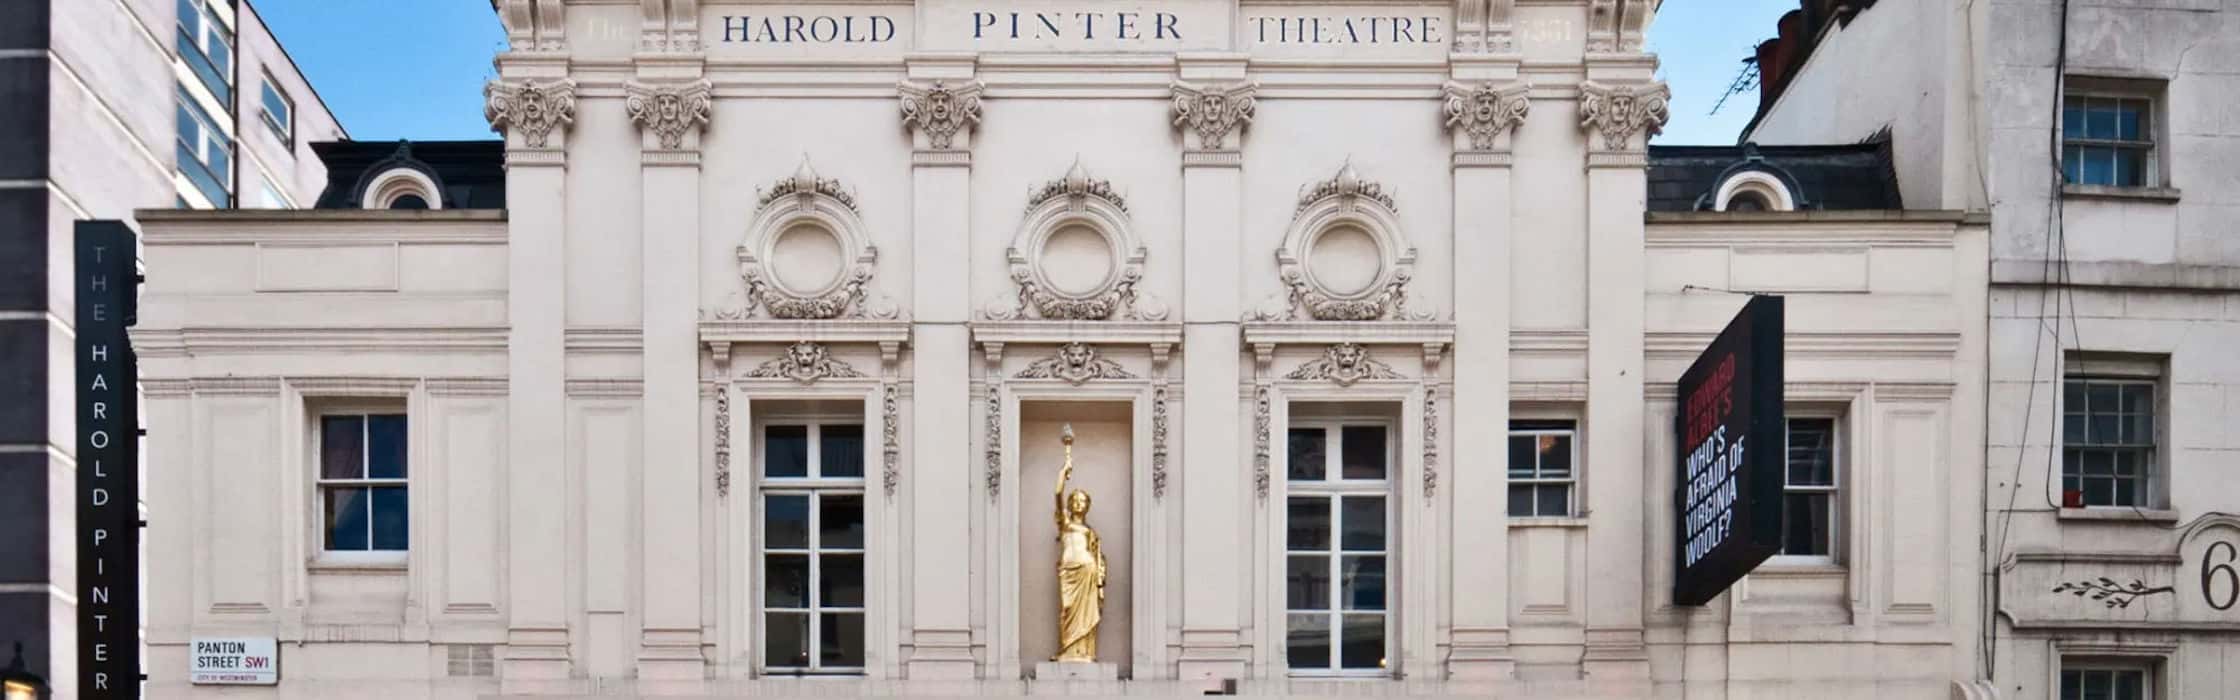 What's On at the Harold Pinter Theatre, London